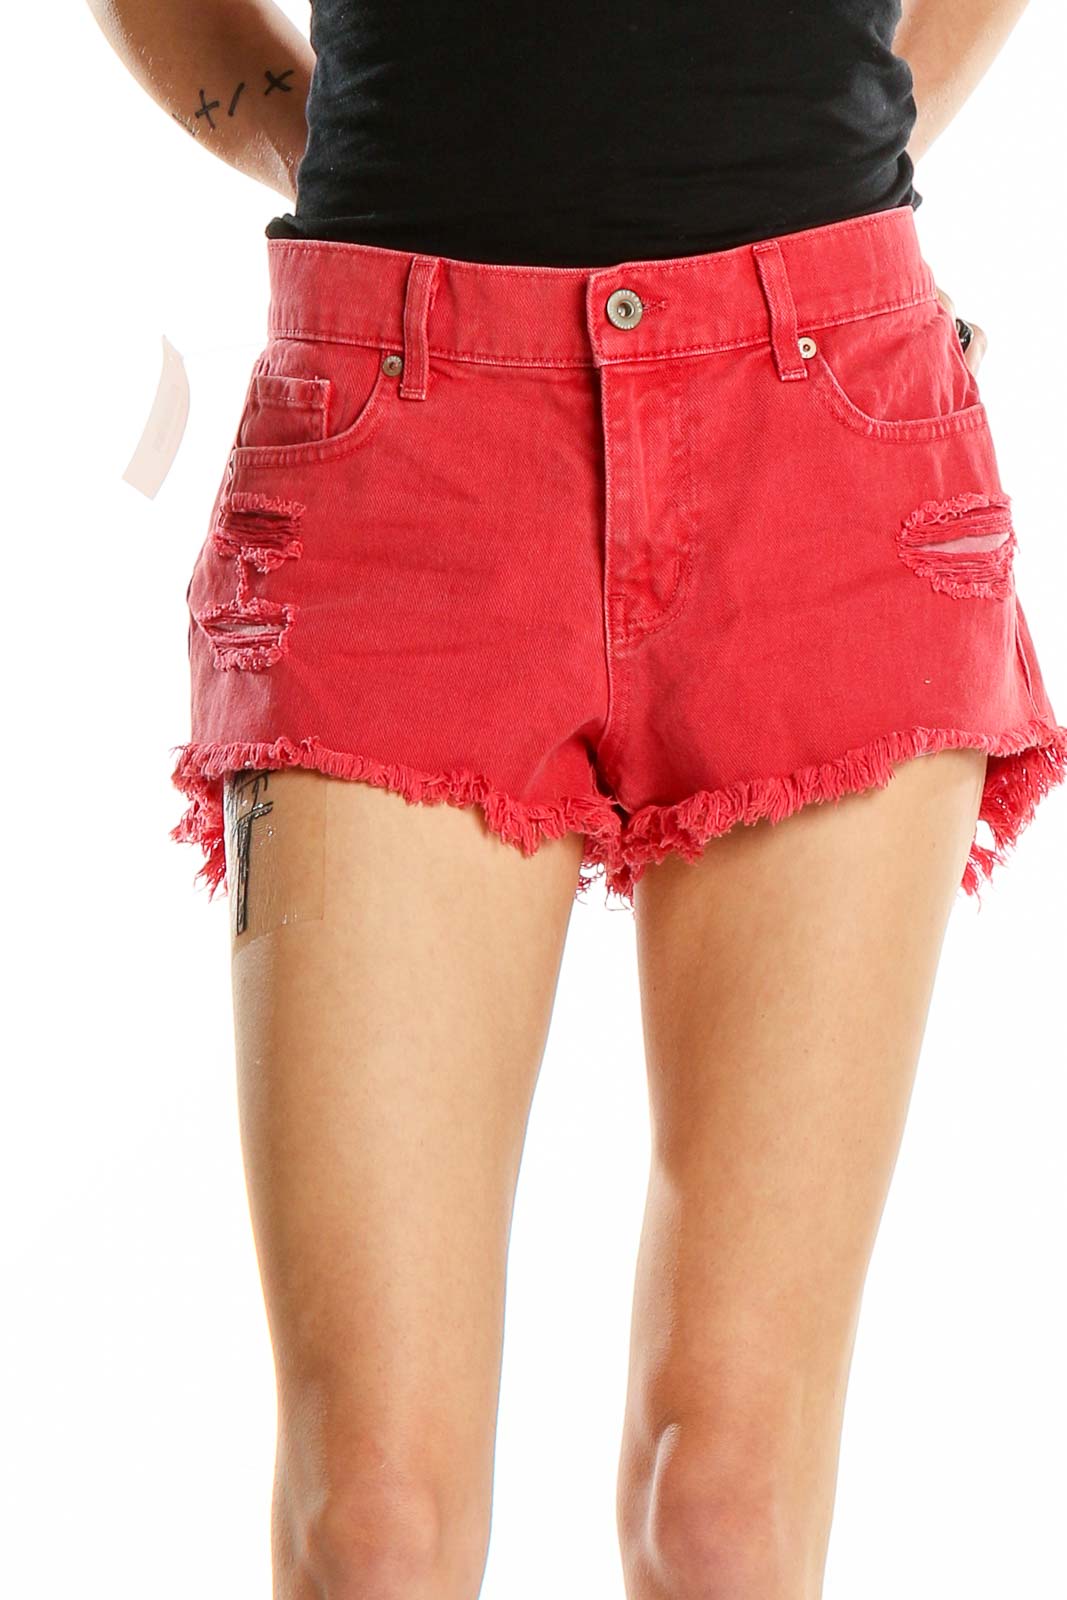 Shop Shorts With Points SilkRoll Cash or 